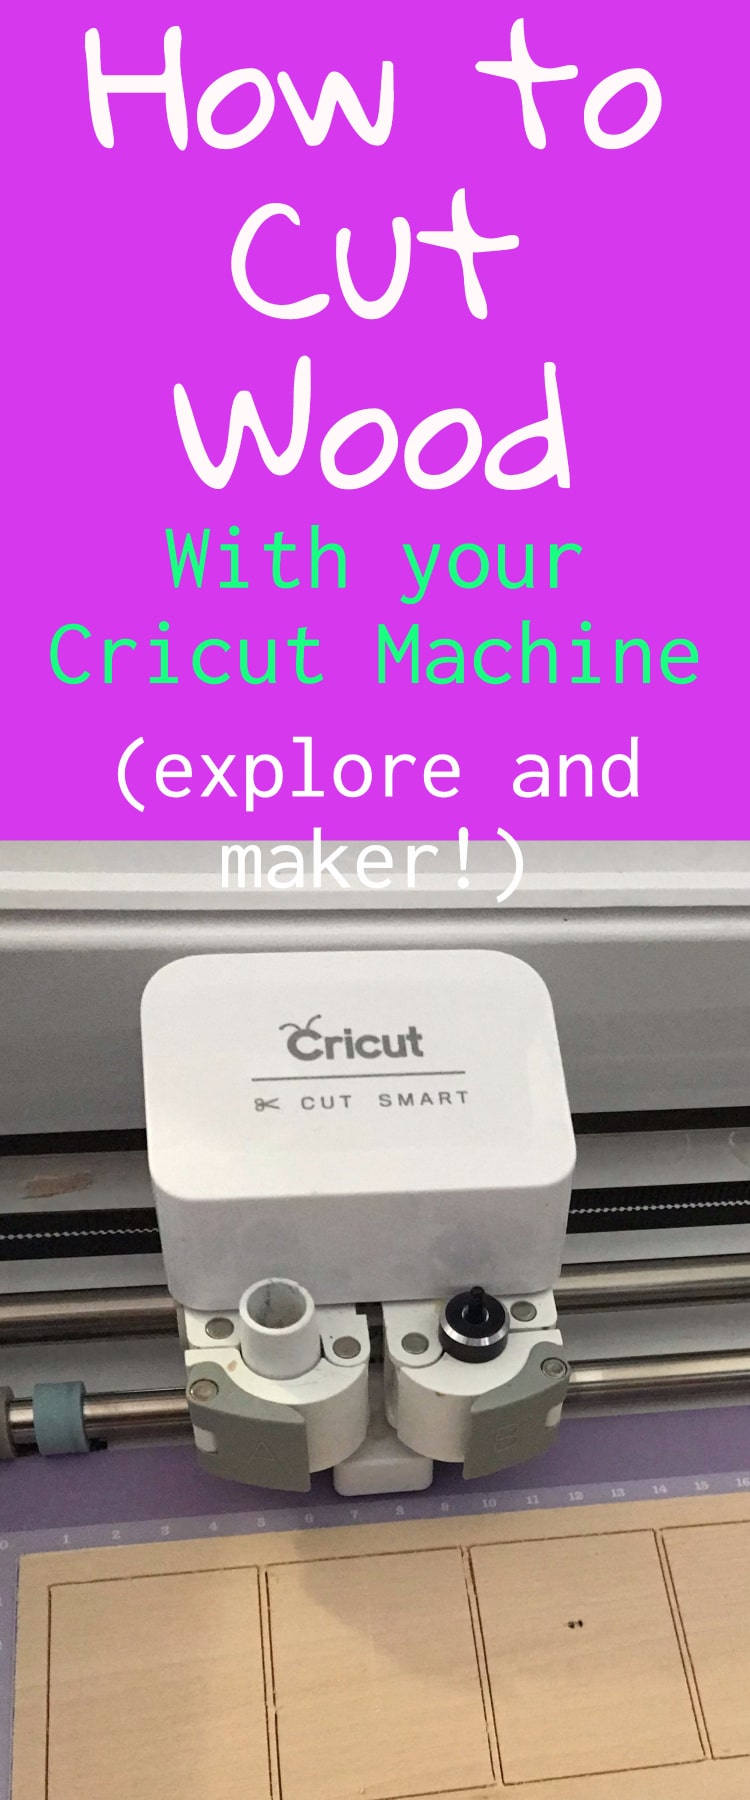 How to cut Basswood in Cricut maker using Knife blade